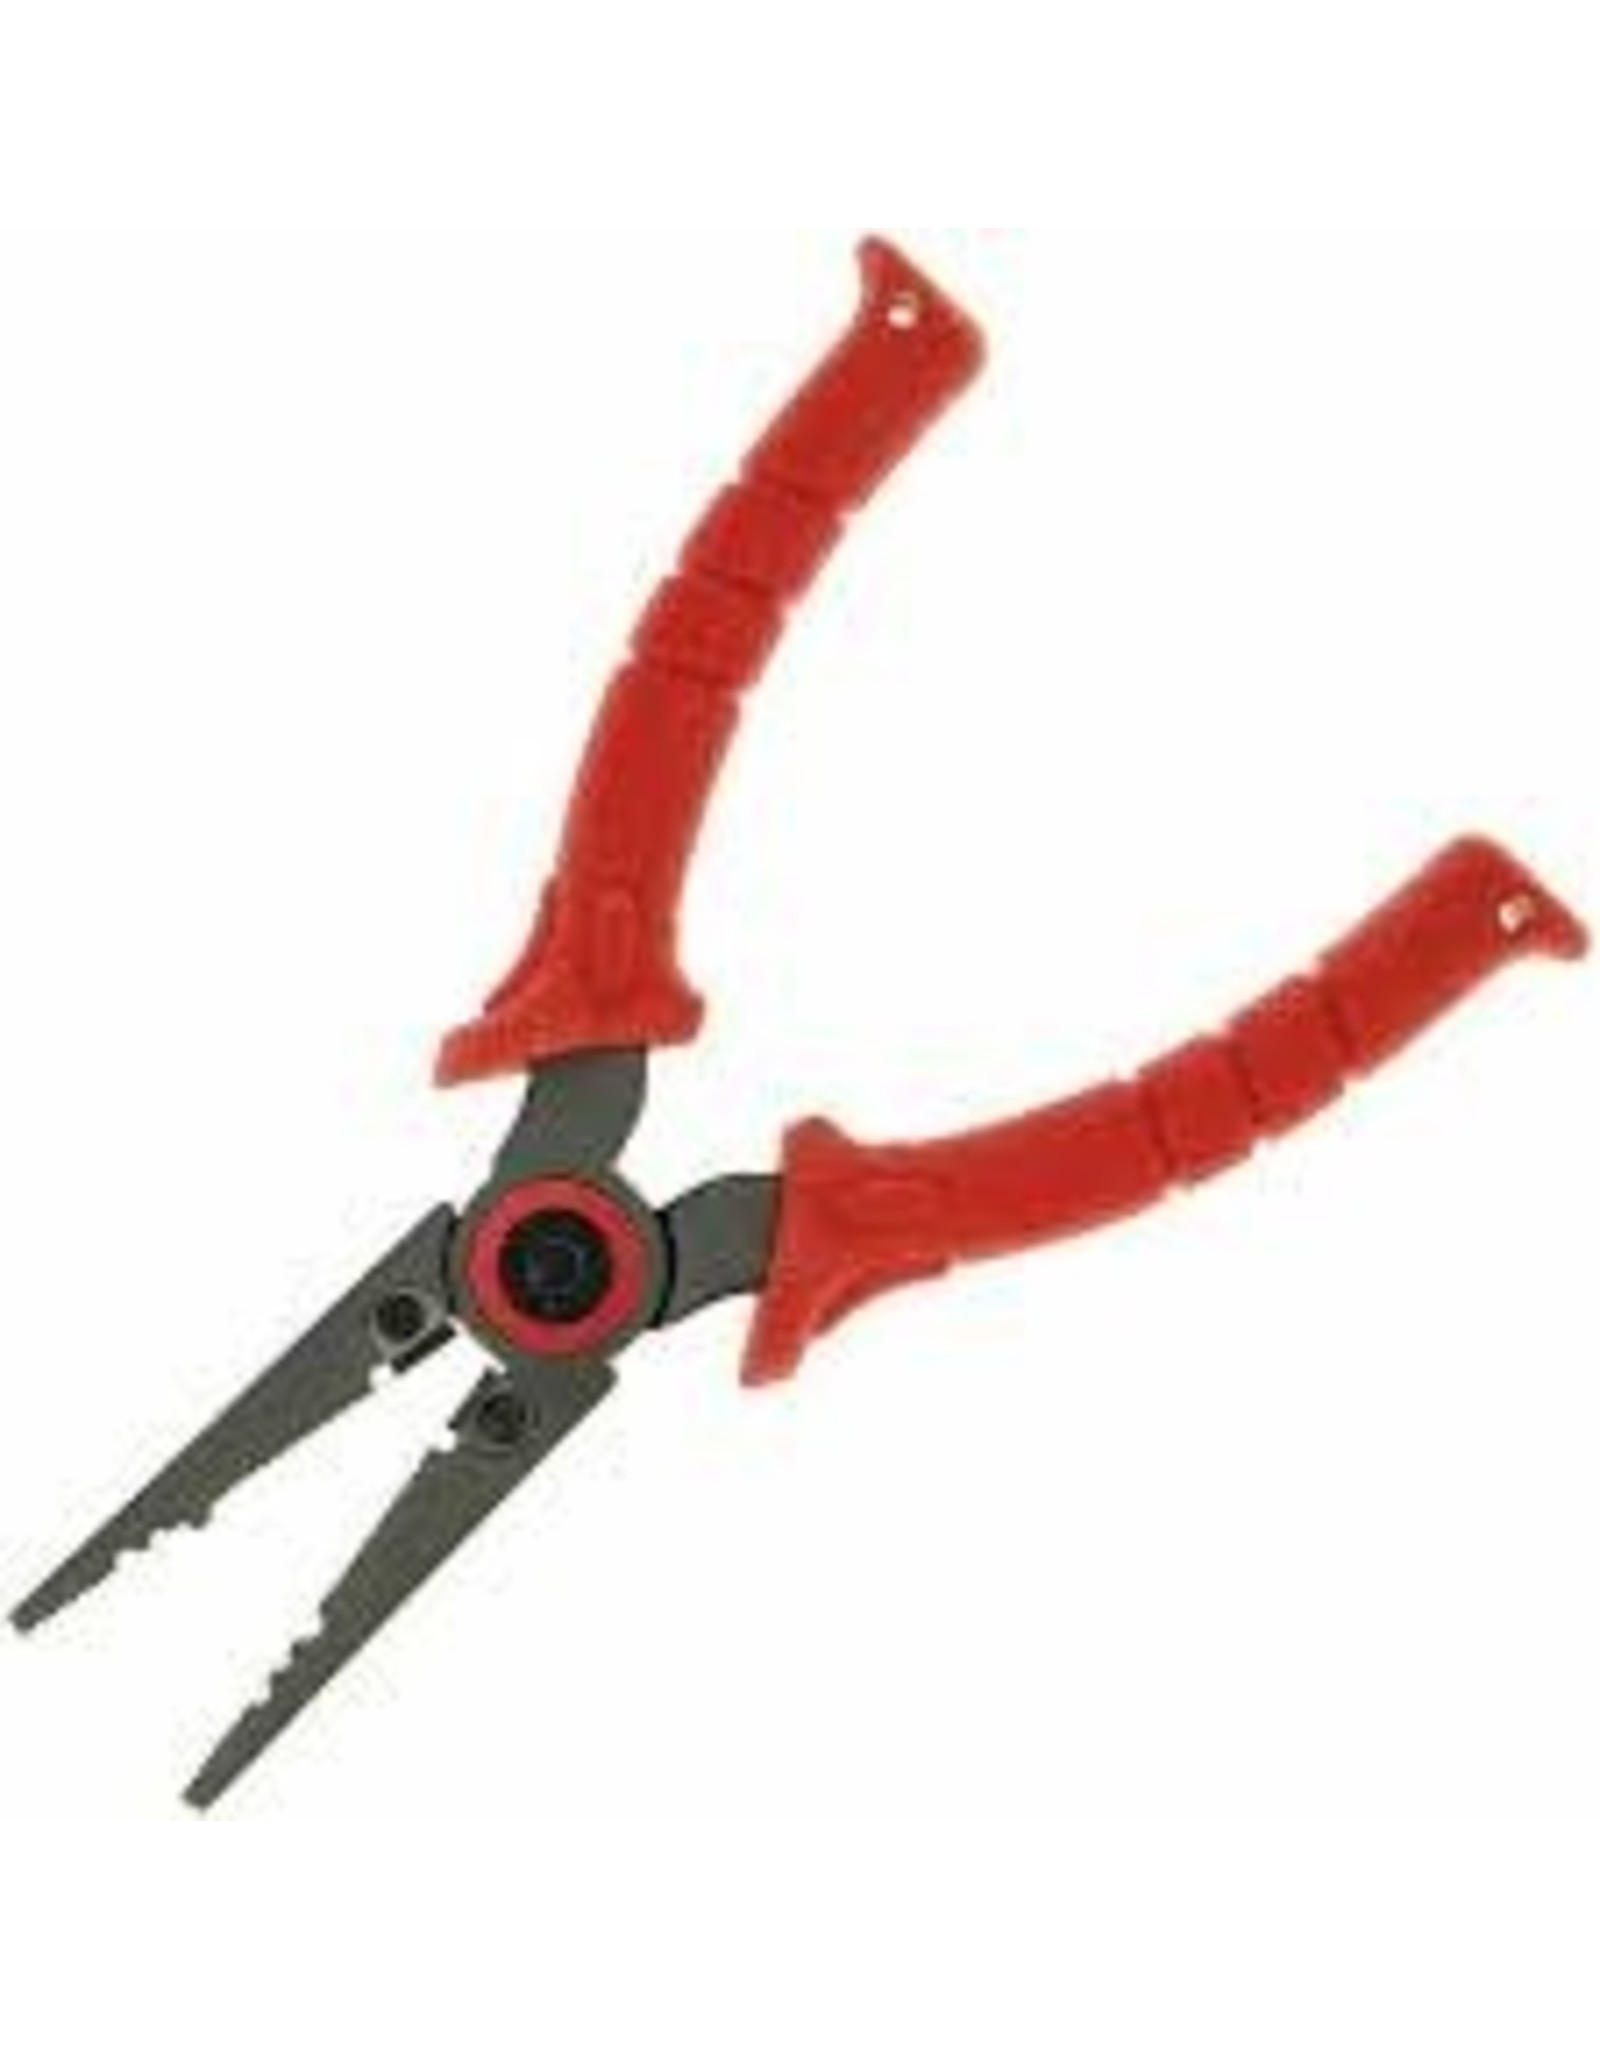 Bubba 1099910 8.5 Stainless Steel Plier